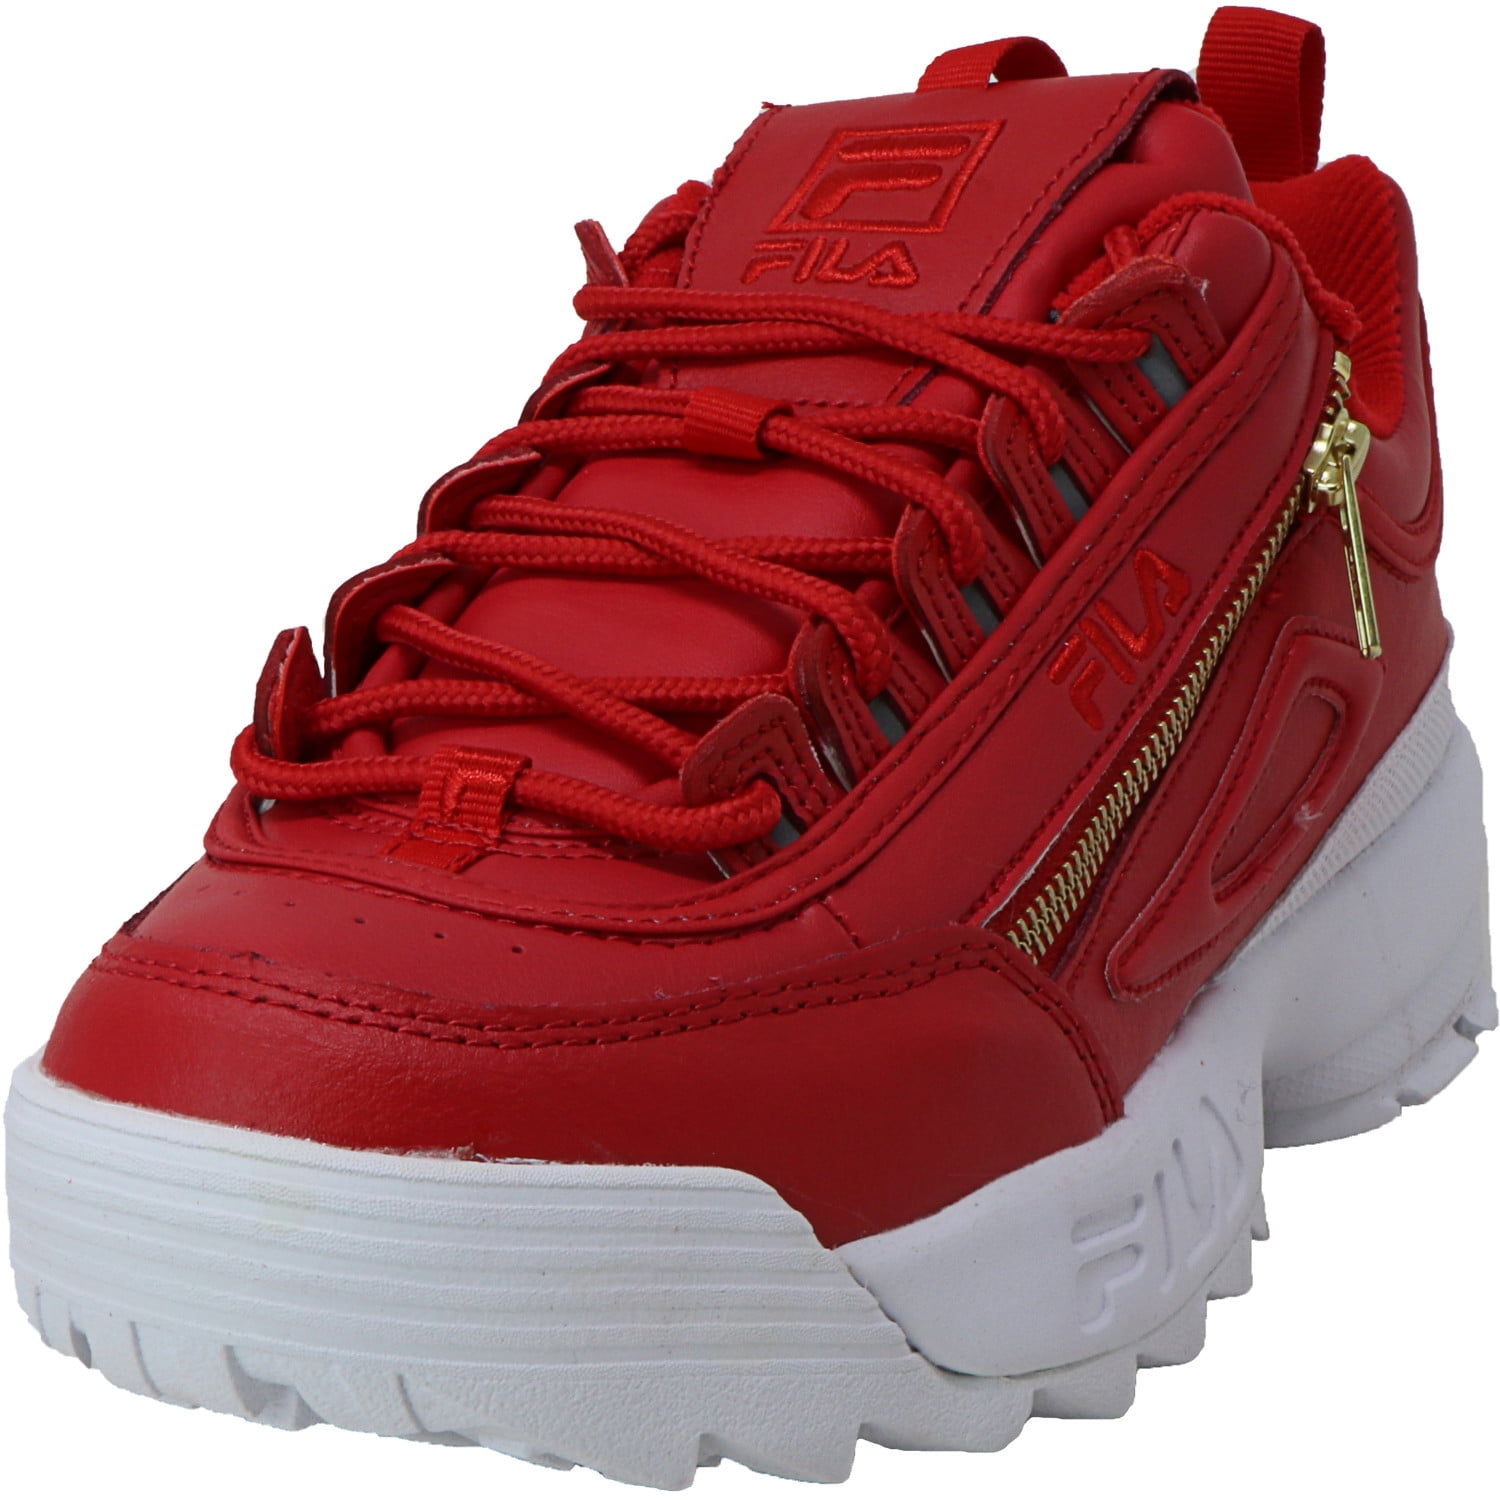 red and gold fila